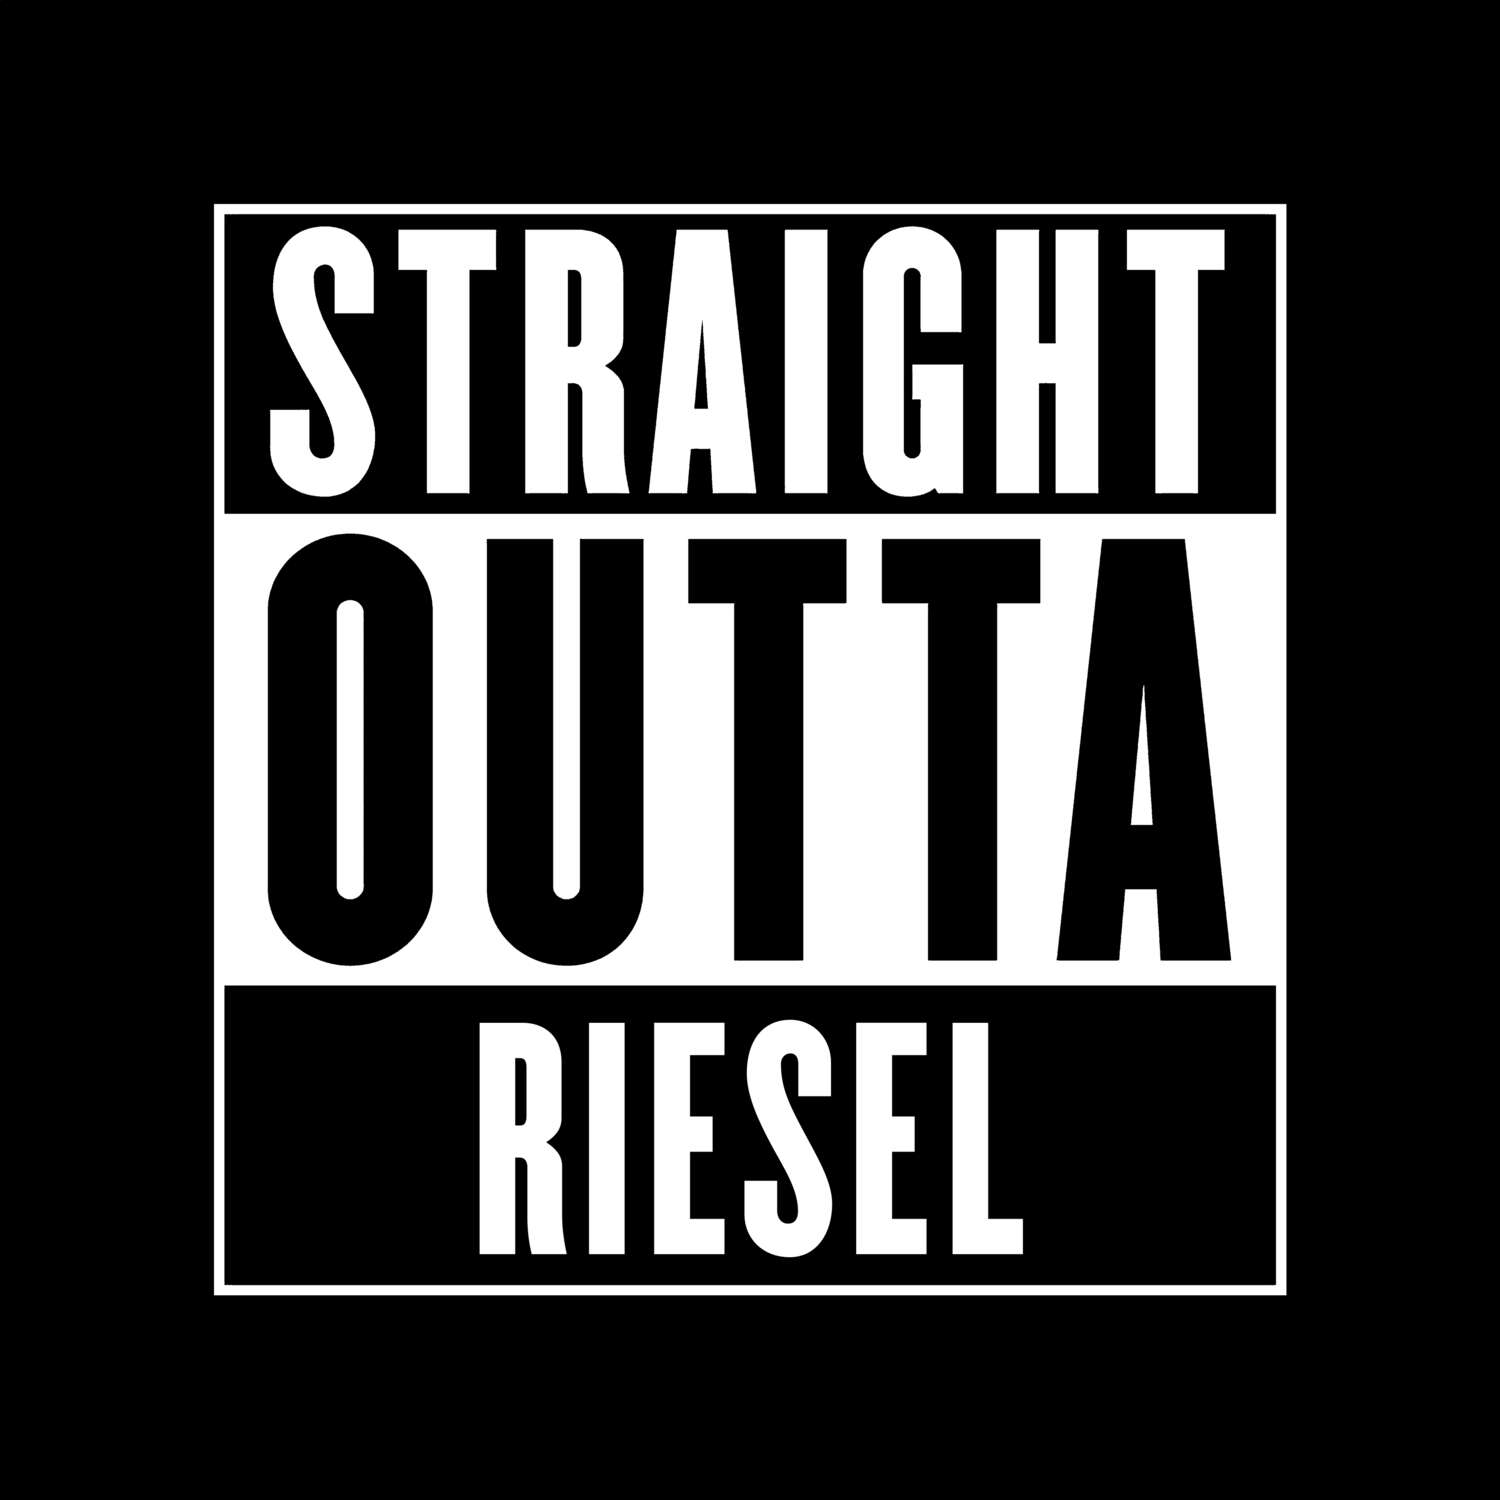 Riesel T-Shirt »Straight Outta«